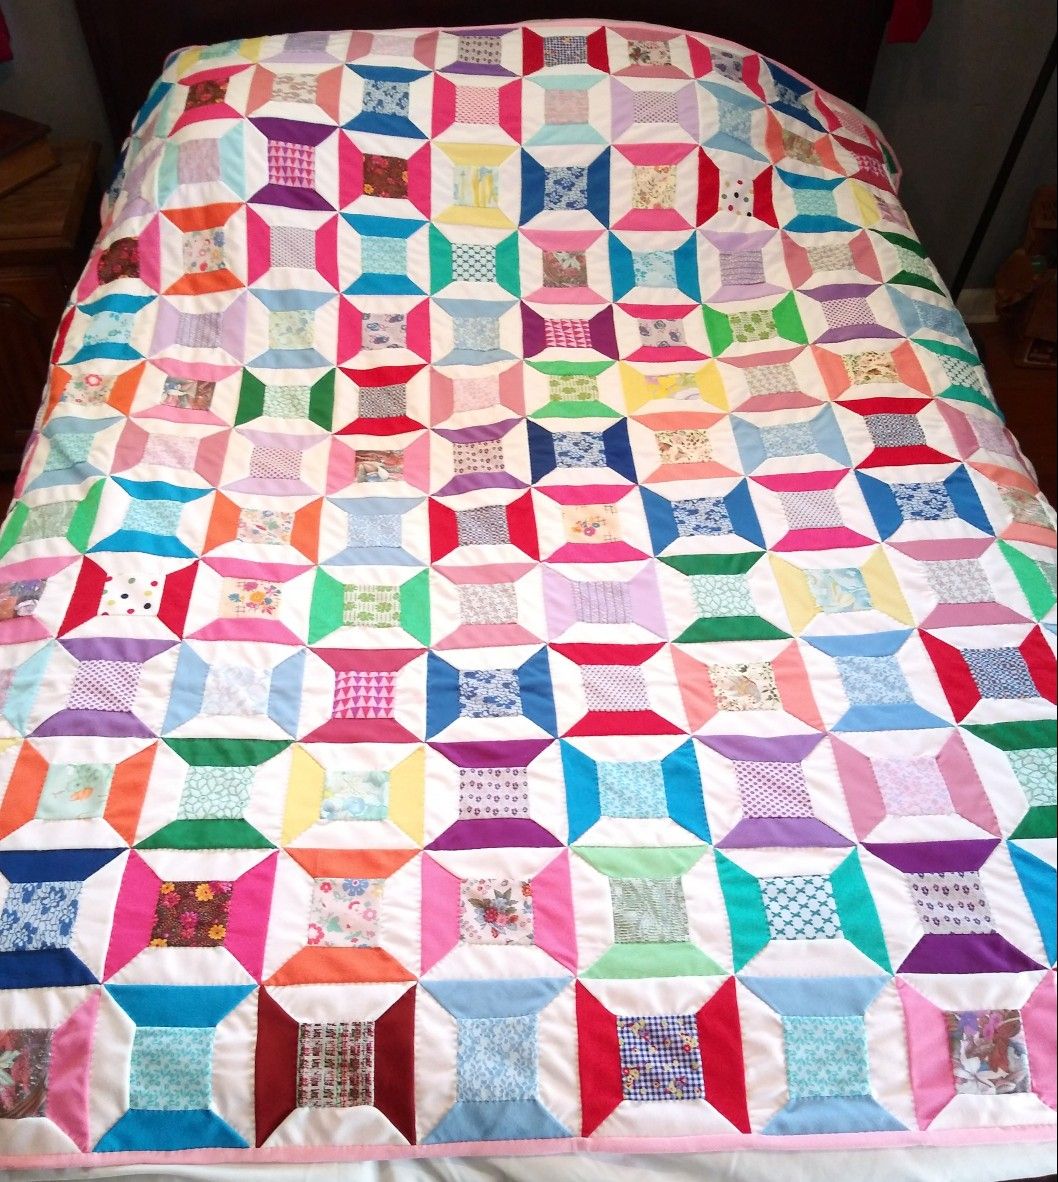 Hand Stitched Hand Sewn Hand Made Patchwork Quilt Twin Full Size Pink 85x78